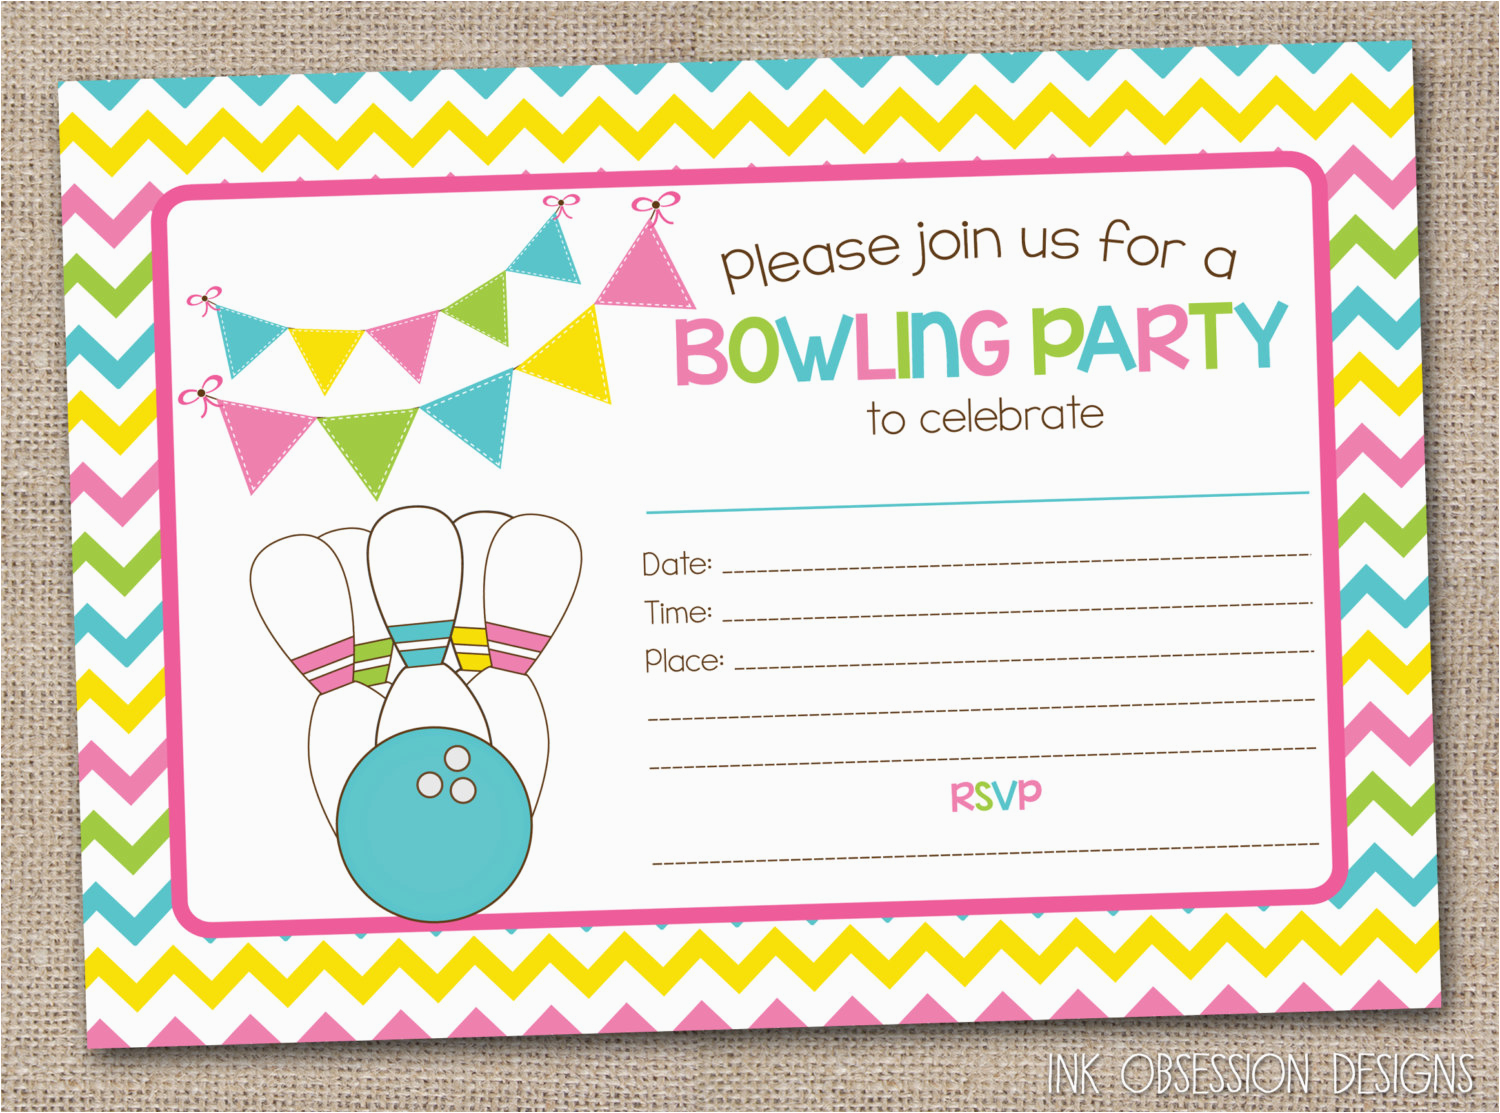 fillable-birthday-invitations-free-printable-bowling-party-invitation-fill-in-by-birthdaybuzz